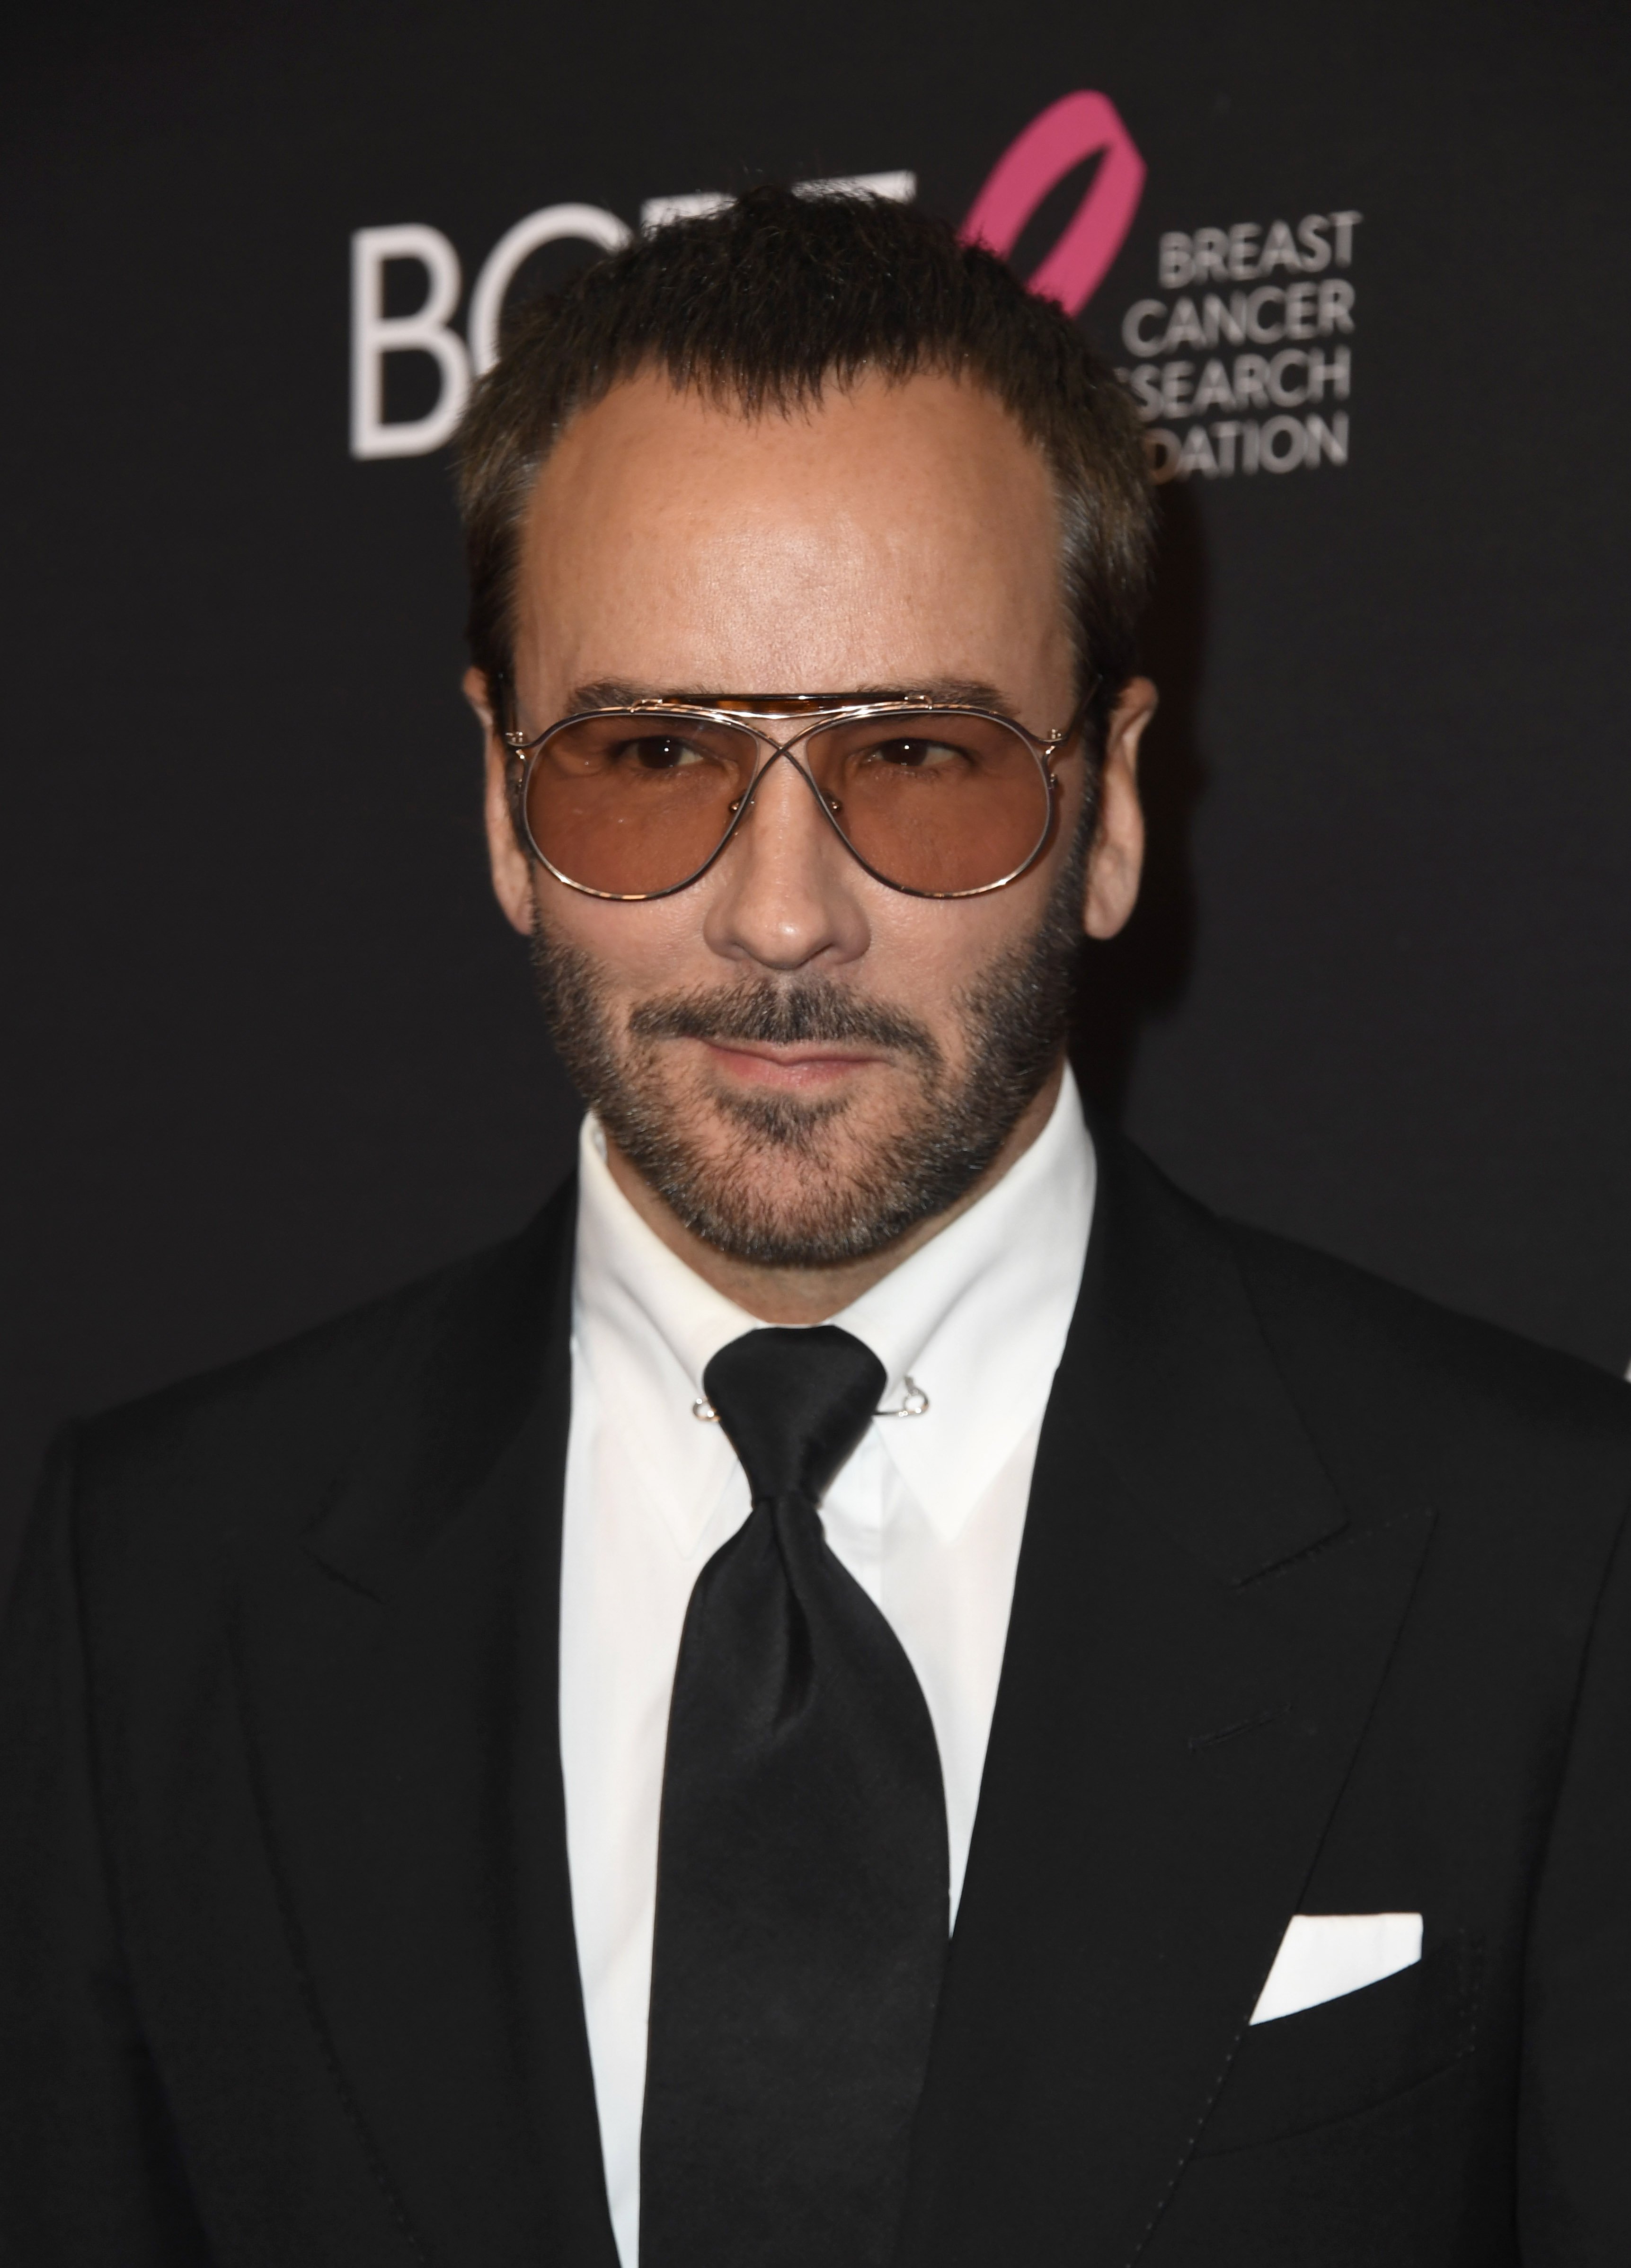 Tom Ford at the Beverly Wilshire Four Seasons Hotel on February 28, 2019, in Beverly Hills, California. | Source: Getty Images